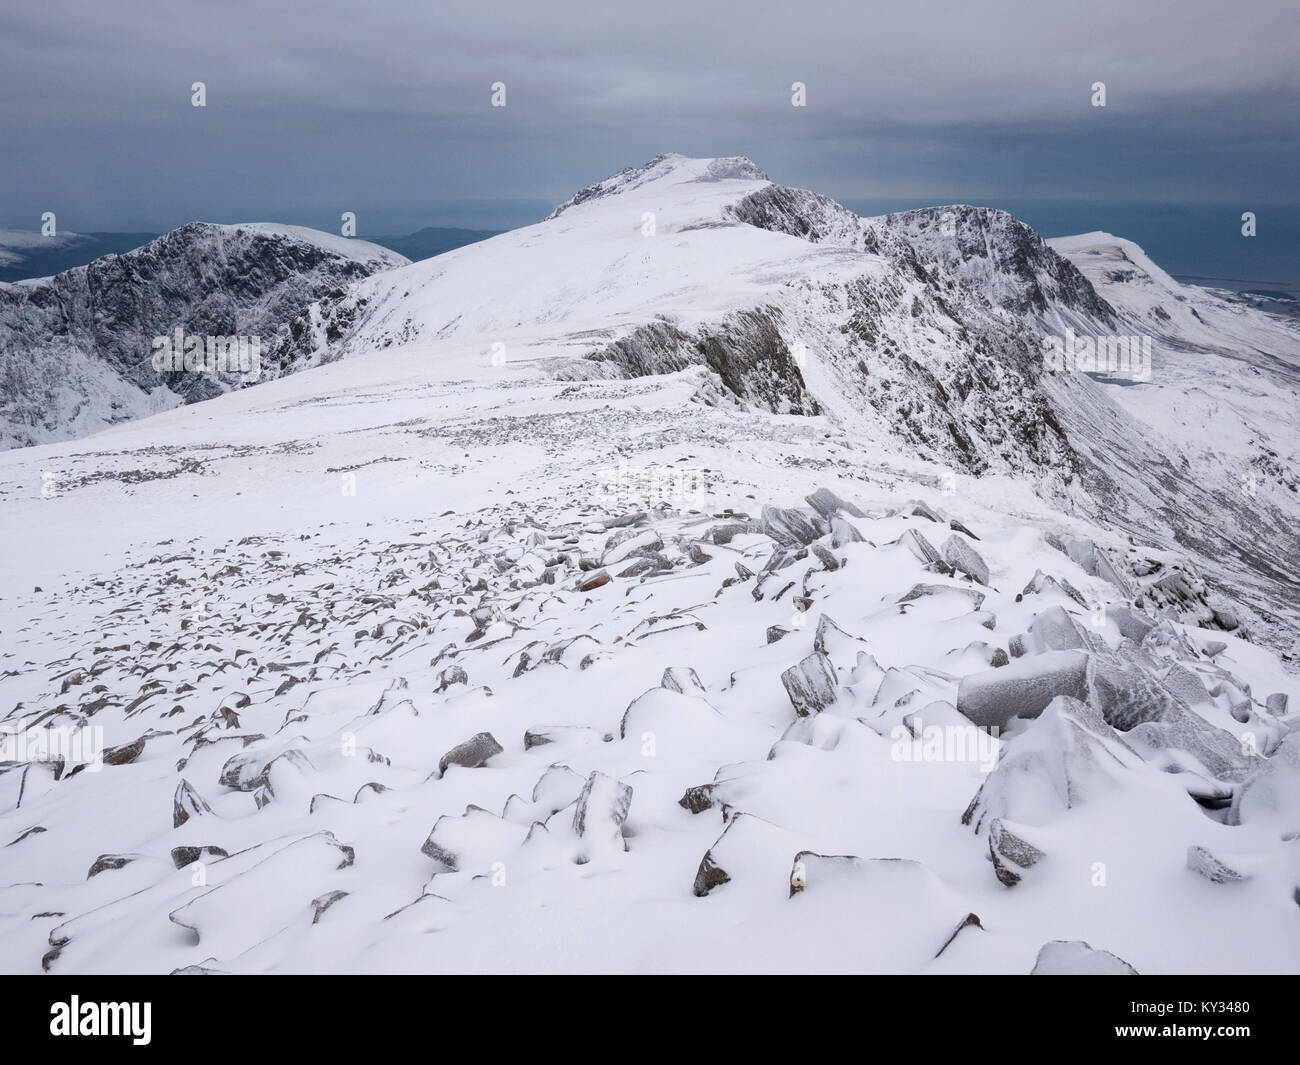 View to Penygadair, the summit of Cadair Idris, from Mynydd Moel under winter conditions. Snowdonia National Park, North Wales. Stock Photo